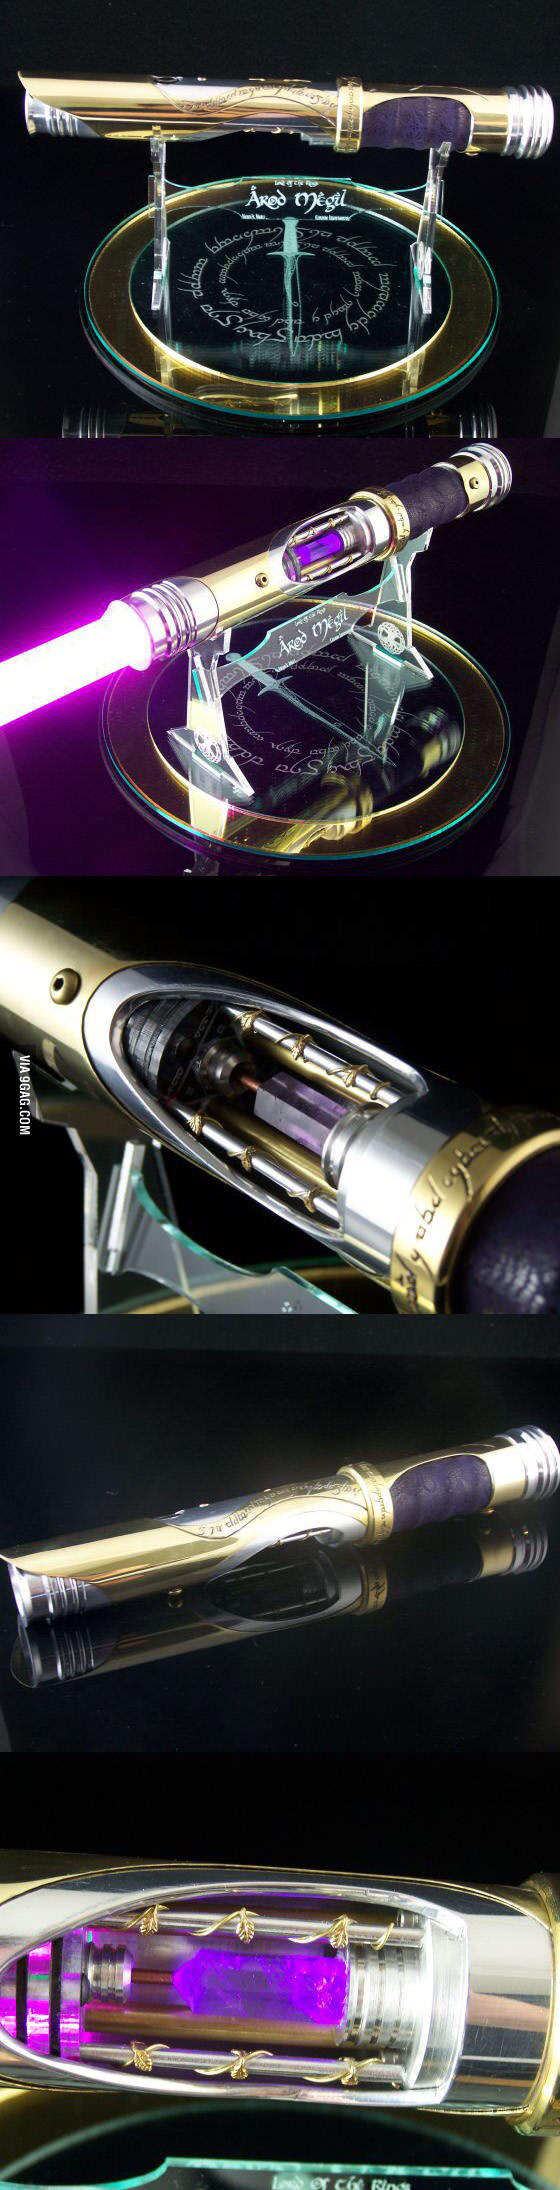 Sword of Omnipotence - Longpost, 9GAG, Ring of omnipotence, Lightsaber, Star Wars IV: A New Hope, Lord of the Rings